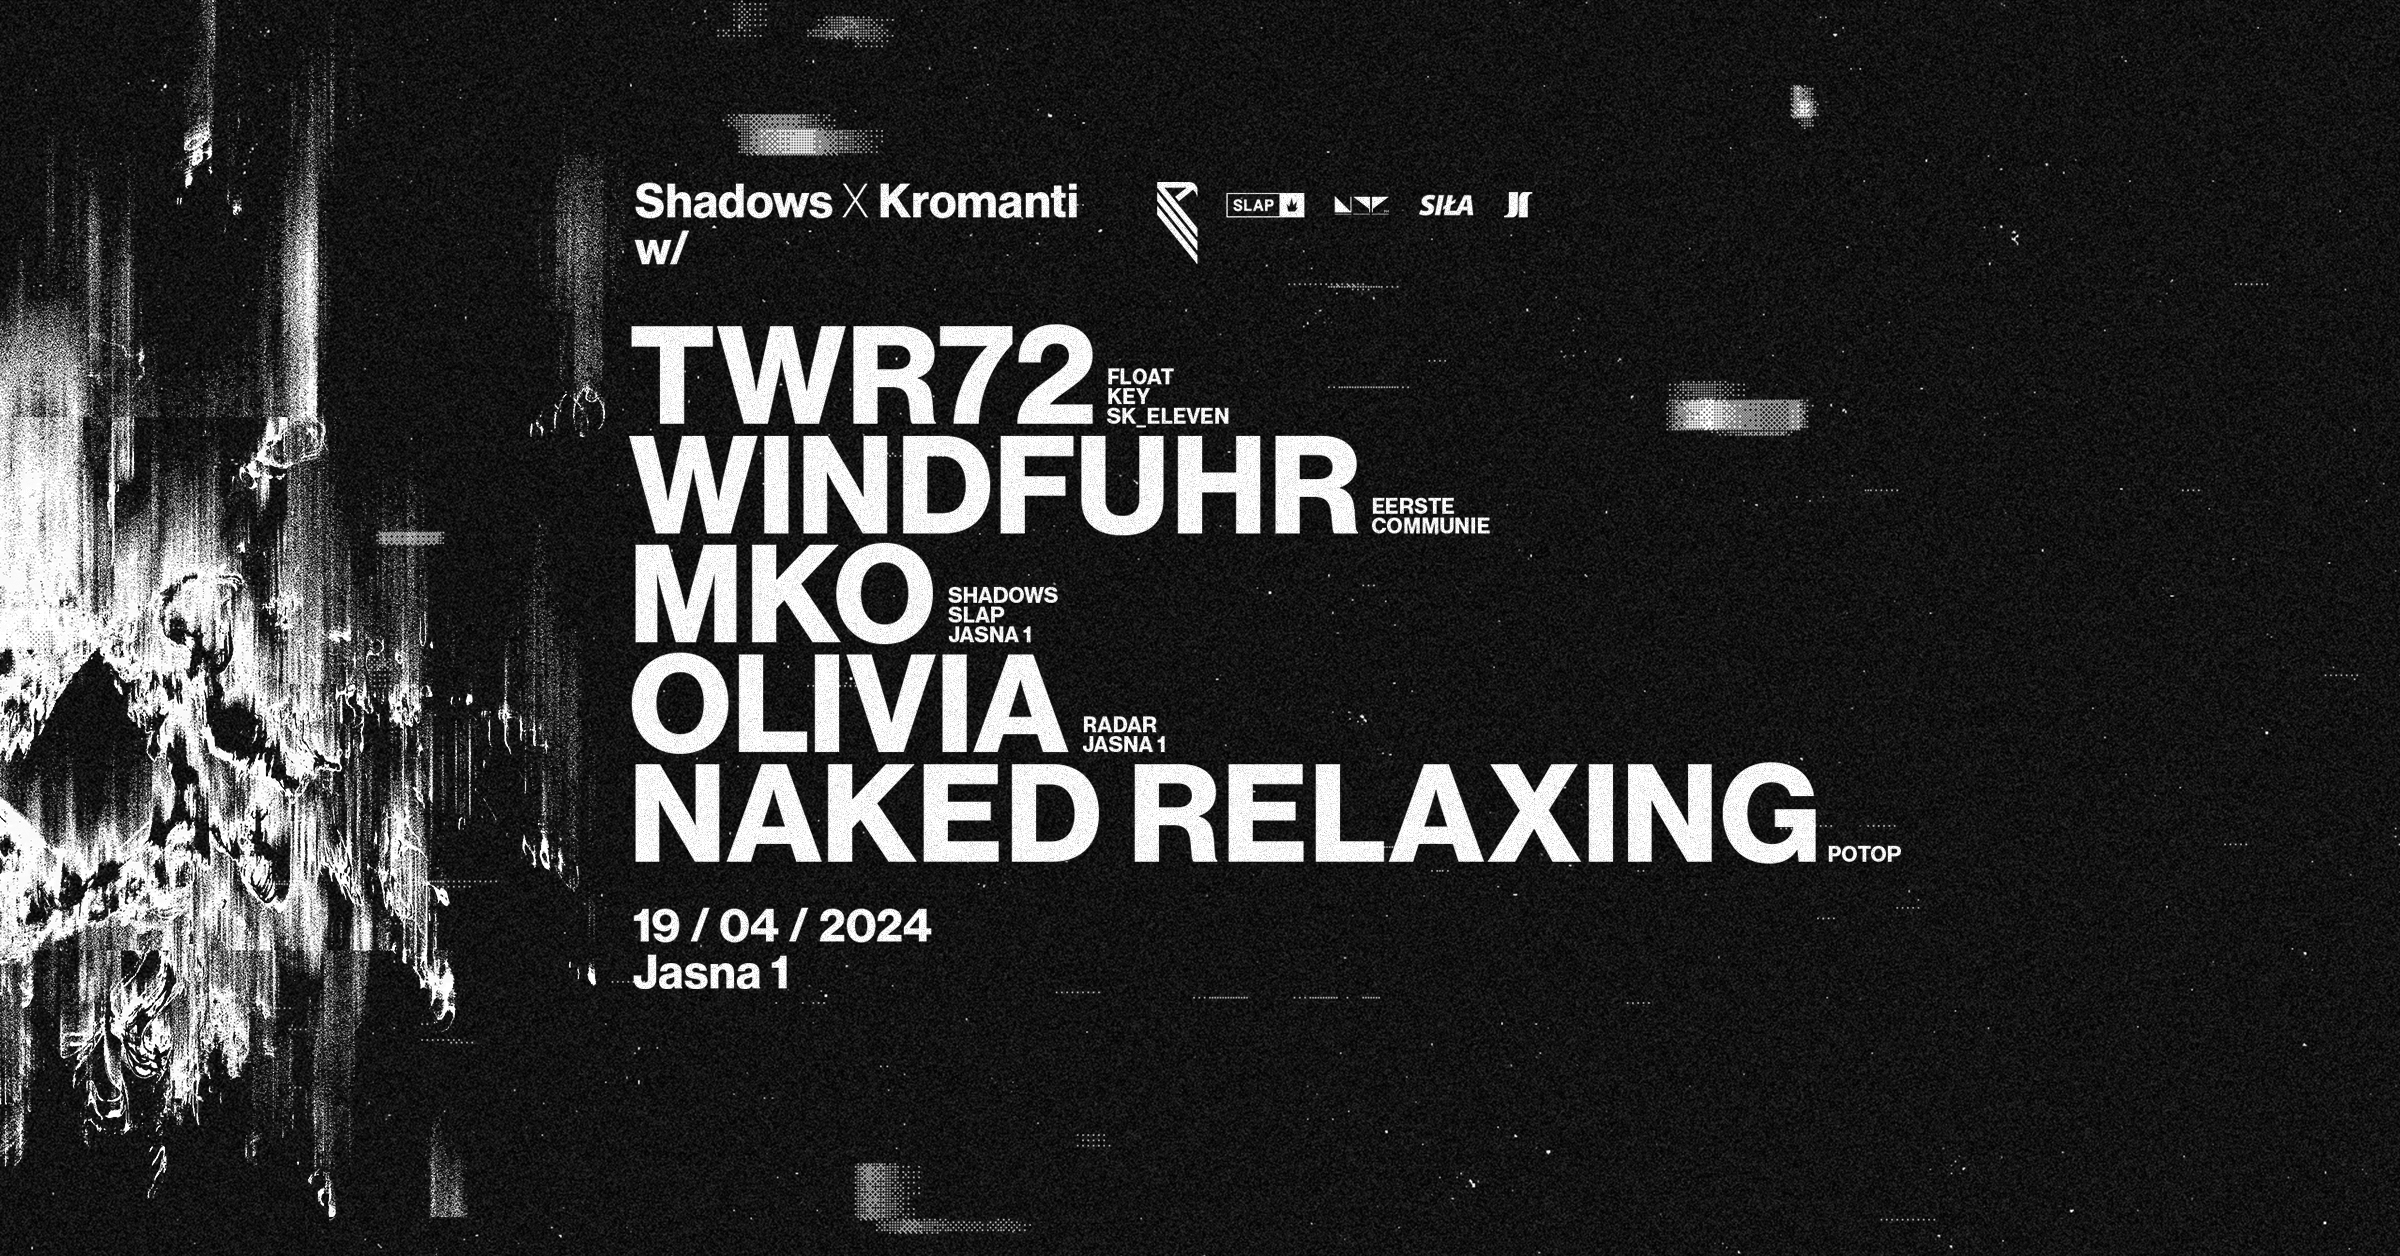 J1 - Shadows x Kromanti: TWR72, WINDFUHR, MKO / Olivia, naked relaxing - フライヤー表